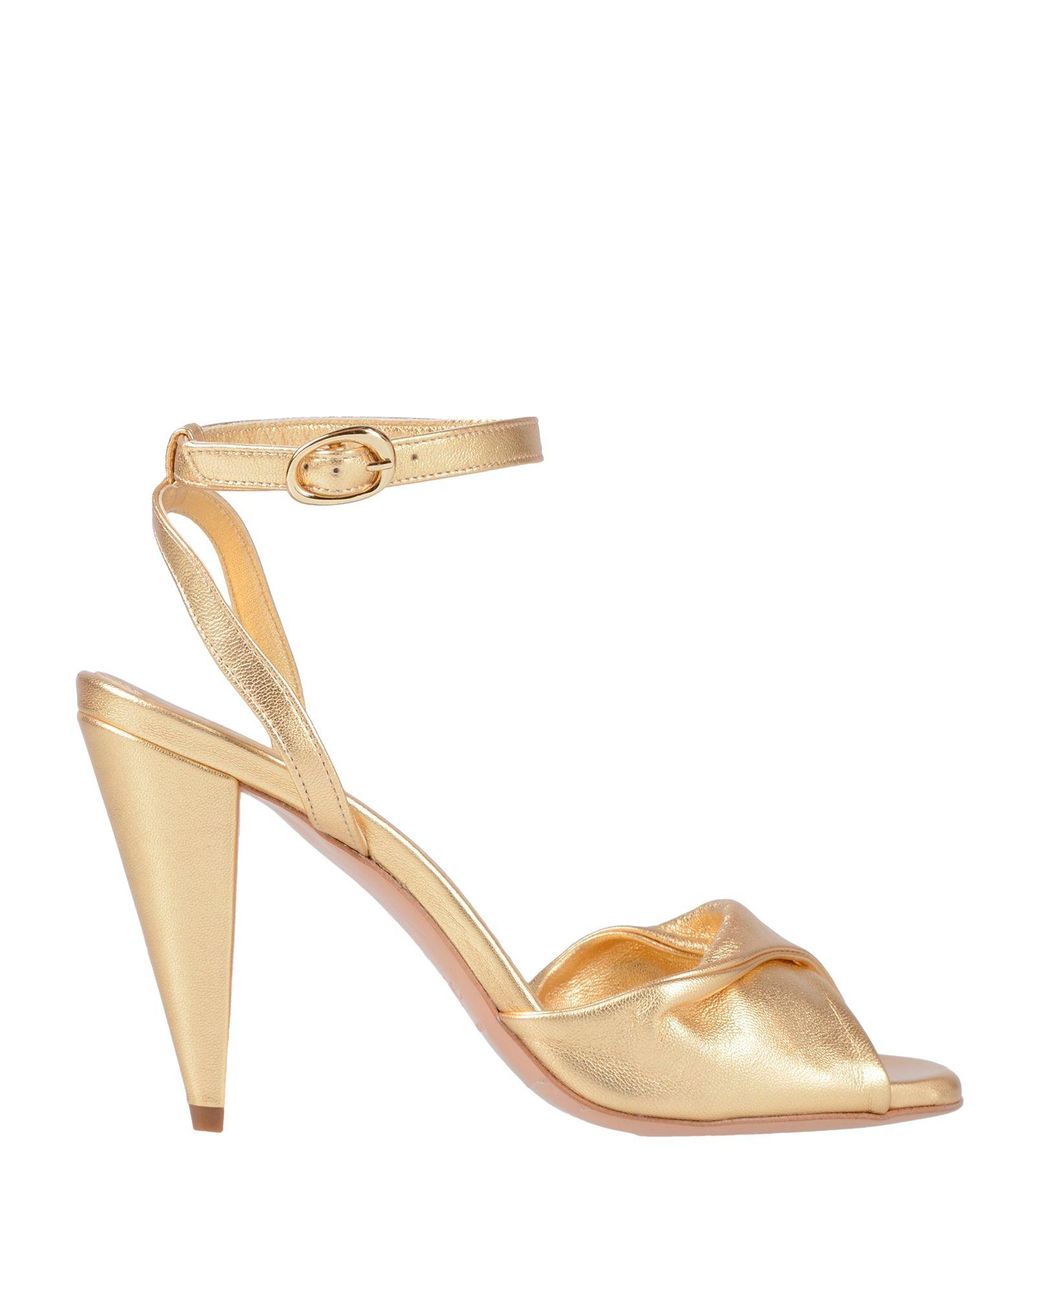 Maje Suede Sandals in Gold (Metallic) - Save 53% - Lyst